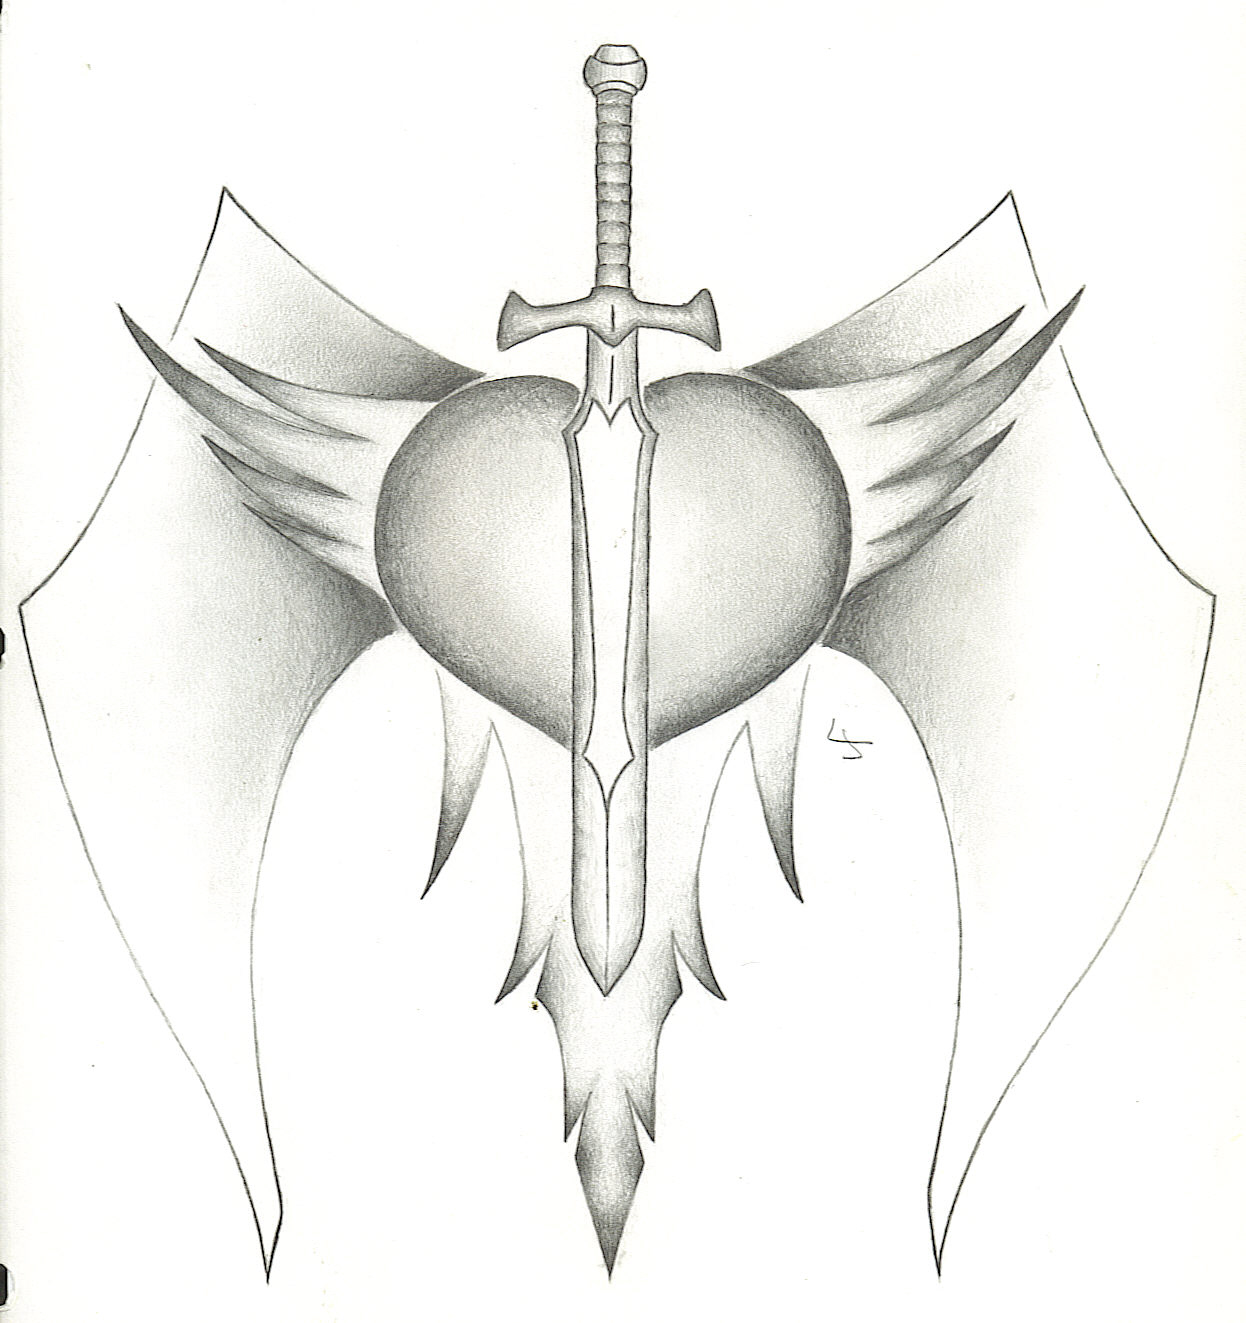 Pencil Drawings Of Hearts With Wings And Banners - Gallery